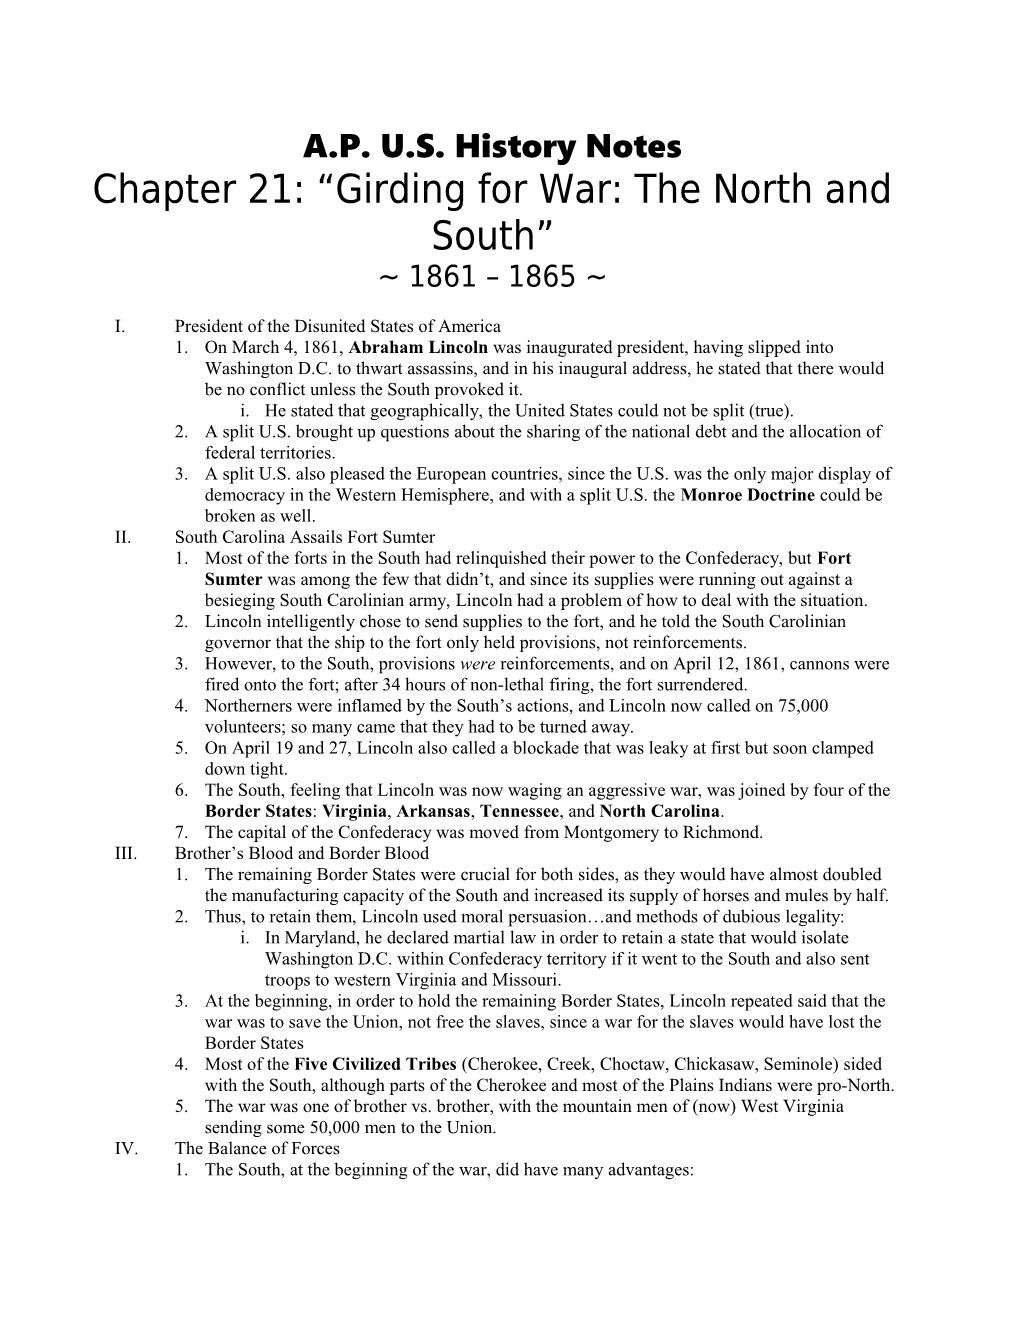 Chapter 21: Girding for War: the North and South